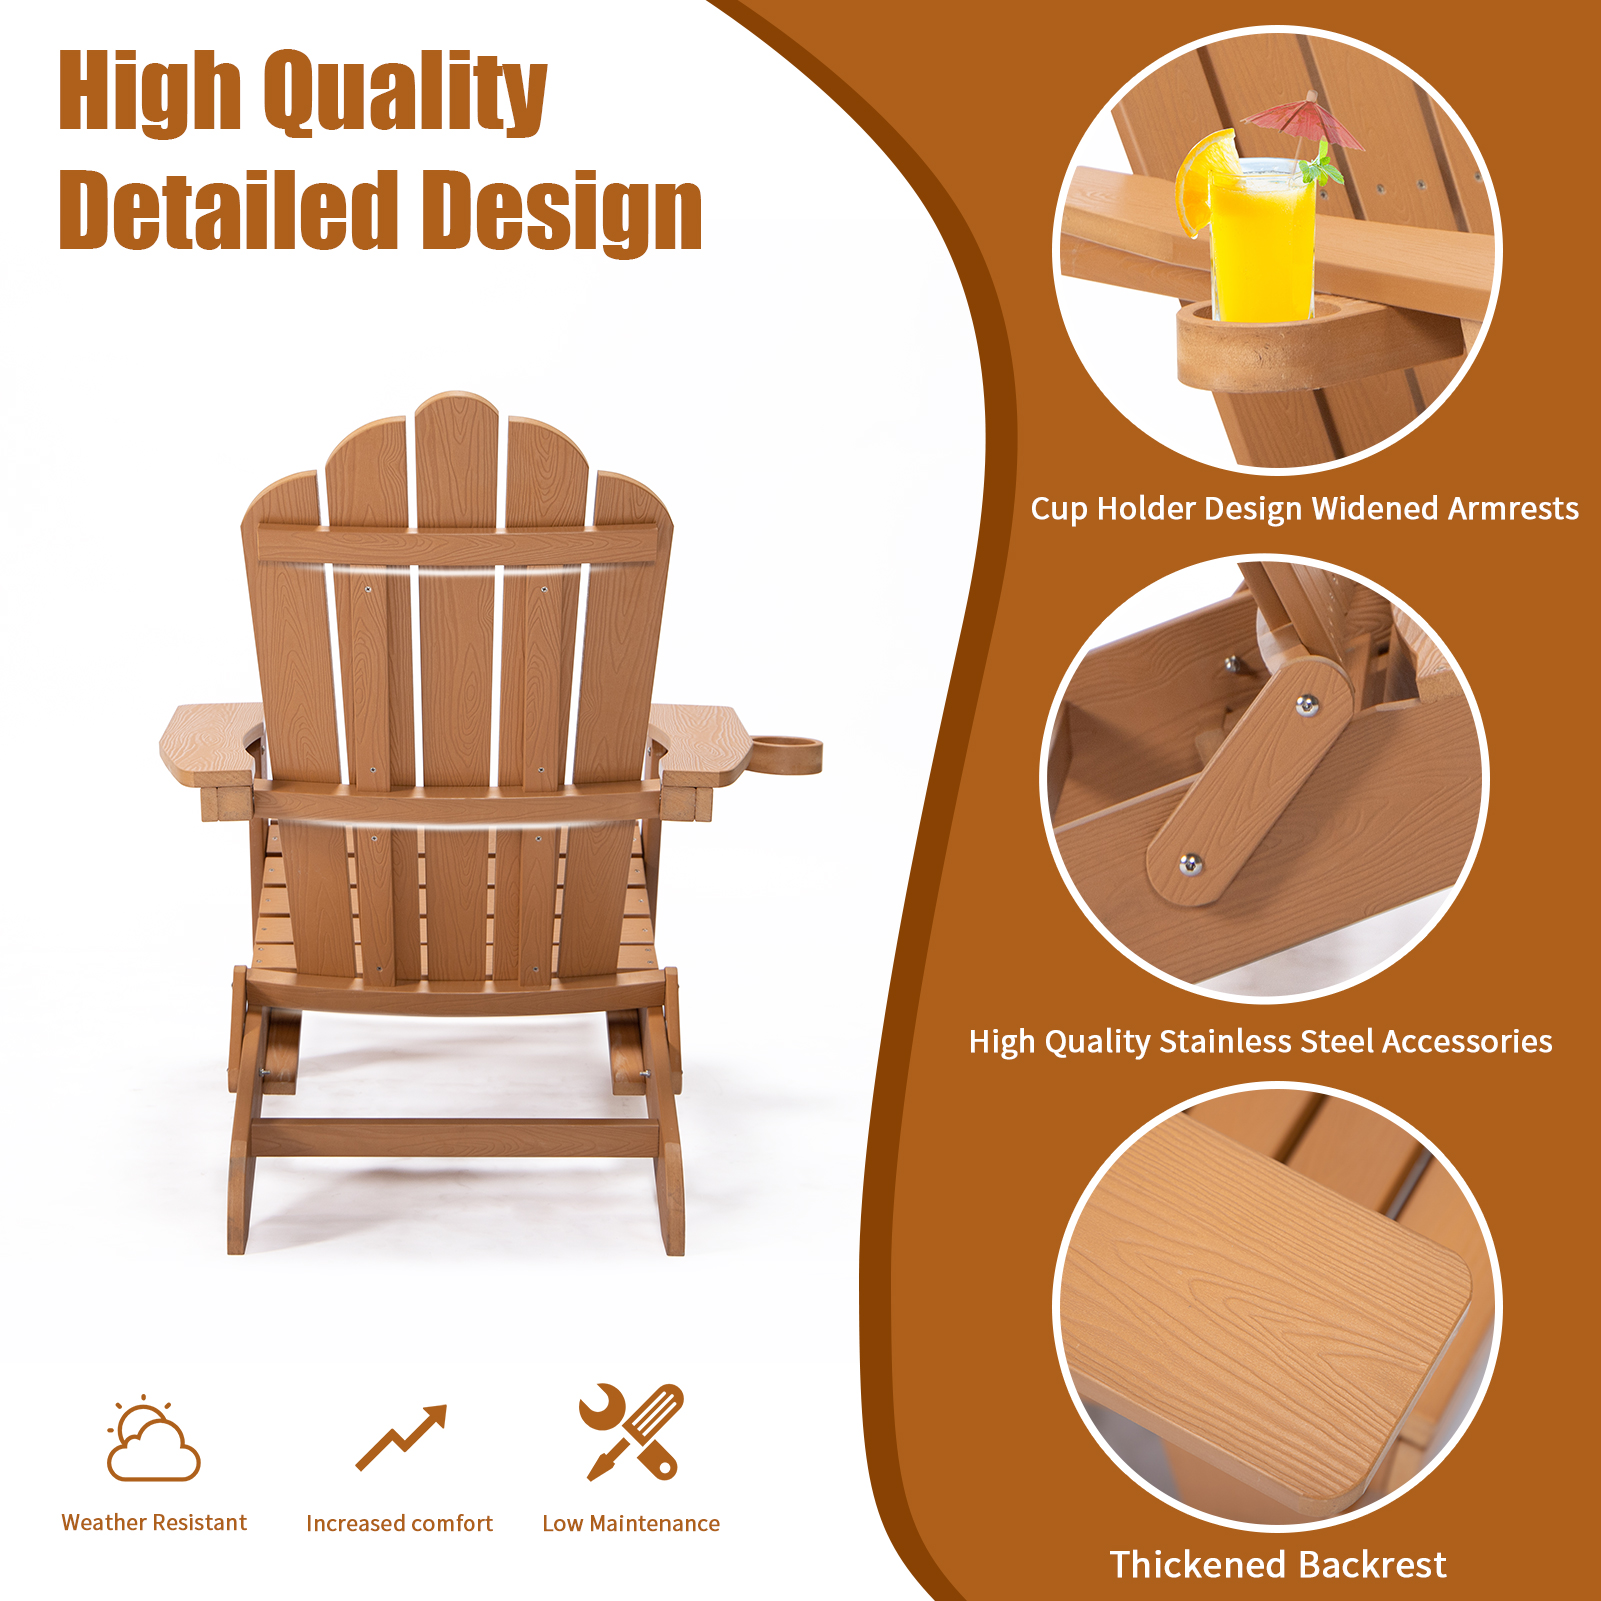 Wood Outdoor Adirondack Chair, Adirondack Chairs Folding Outdoor Patio Chairs, Wooden Accent Lounge Furniture for Yard, Patio - image 2 of 9